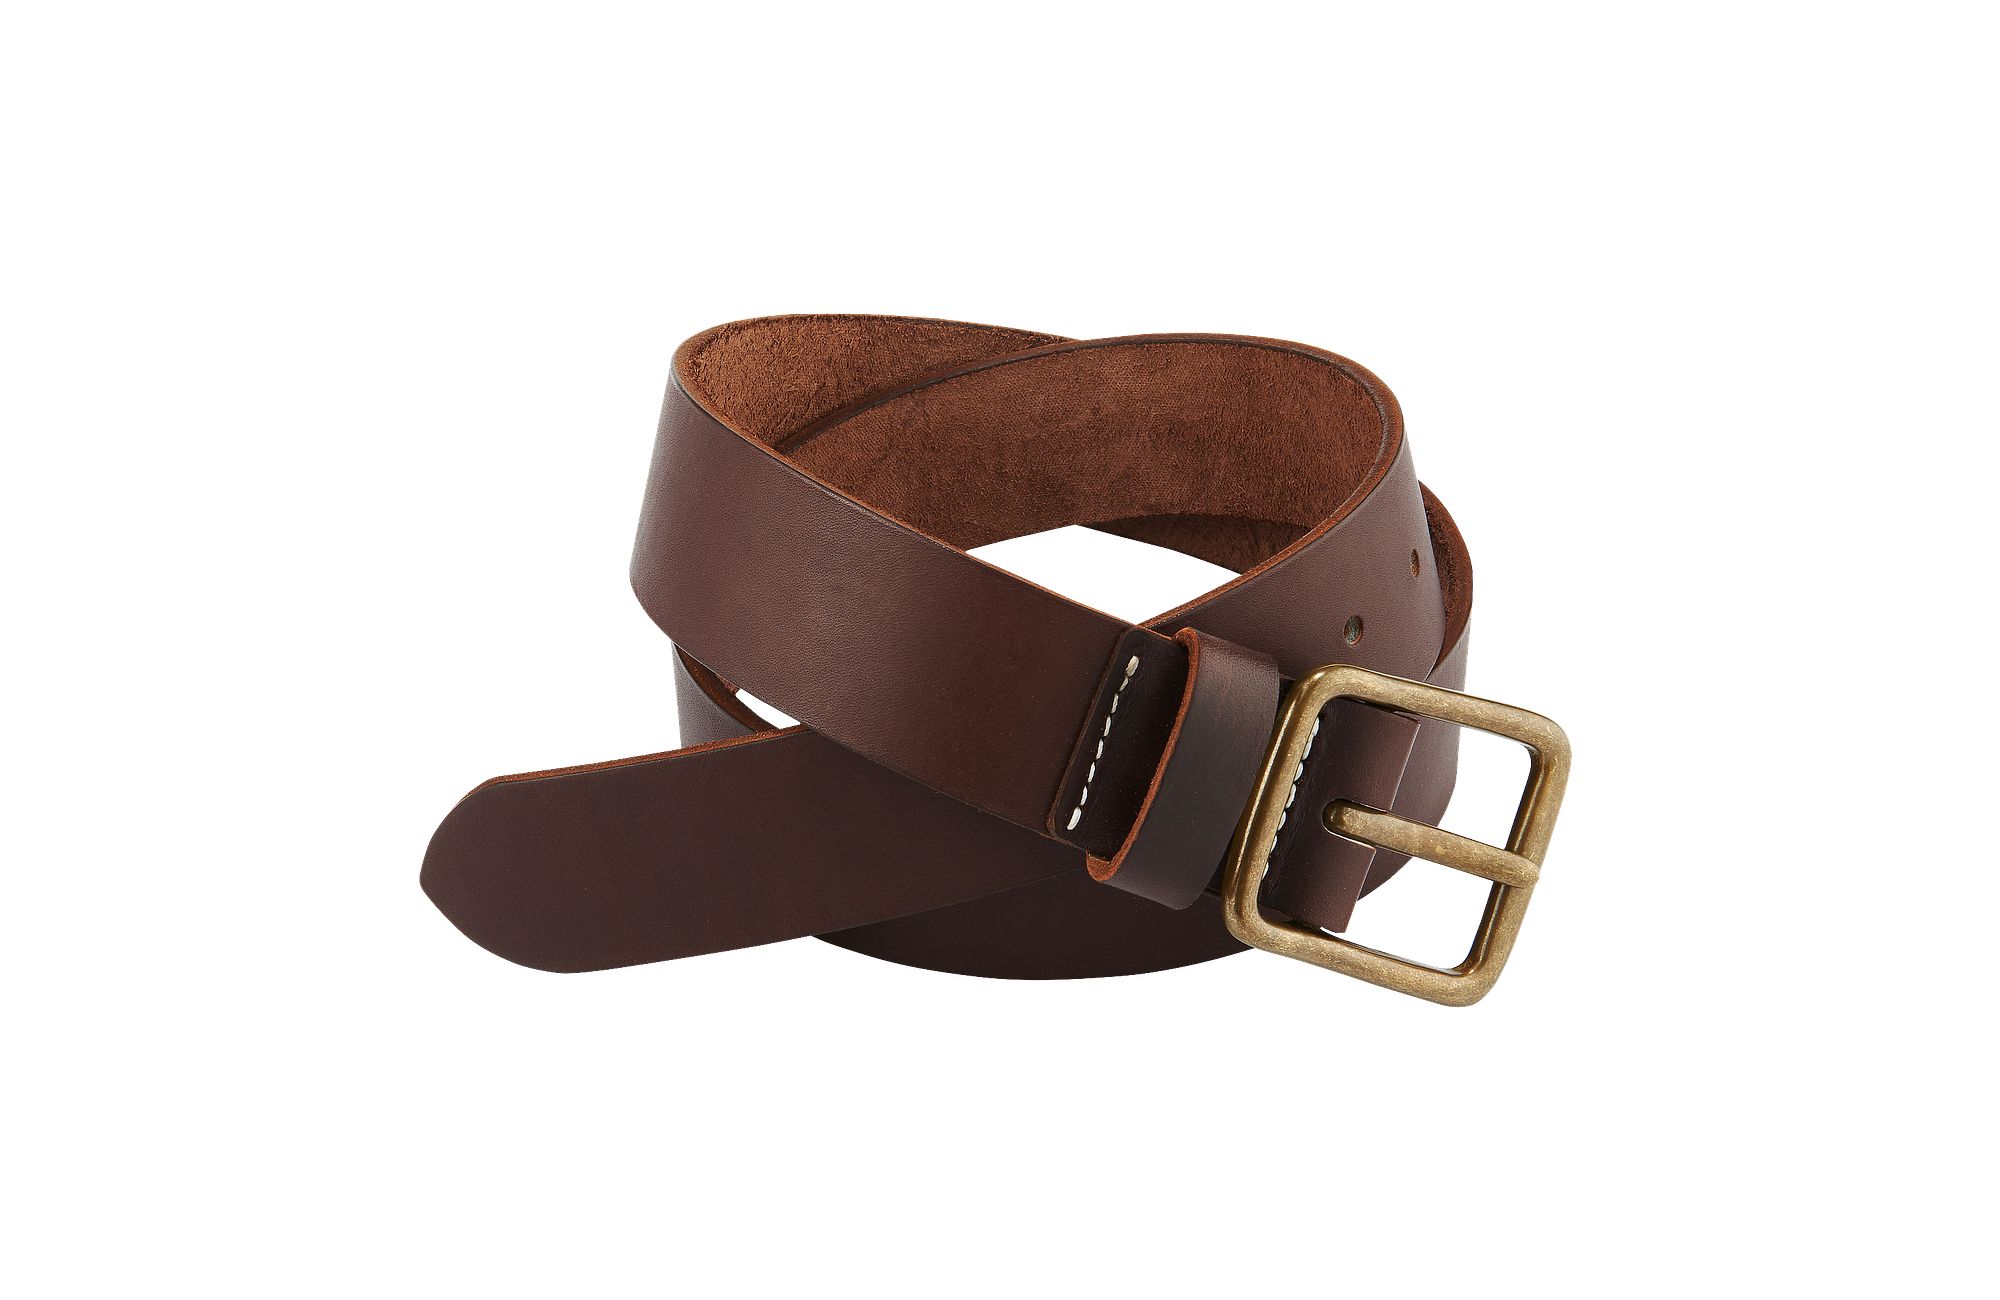 Men's Red Wing Leather Belt in Dark Brown 96502 | Red Wing